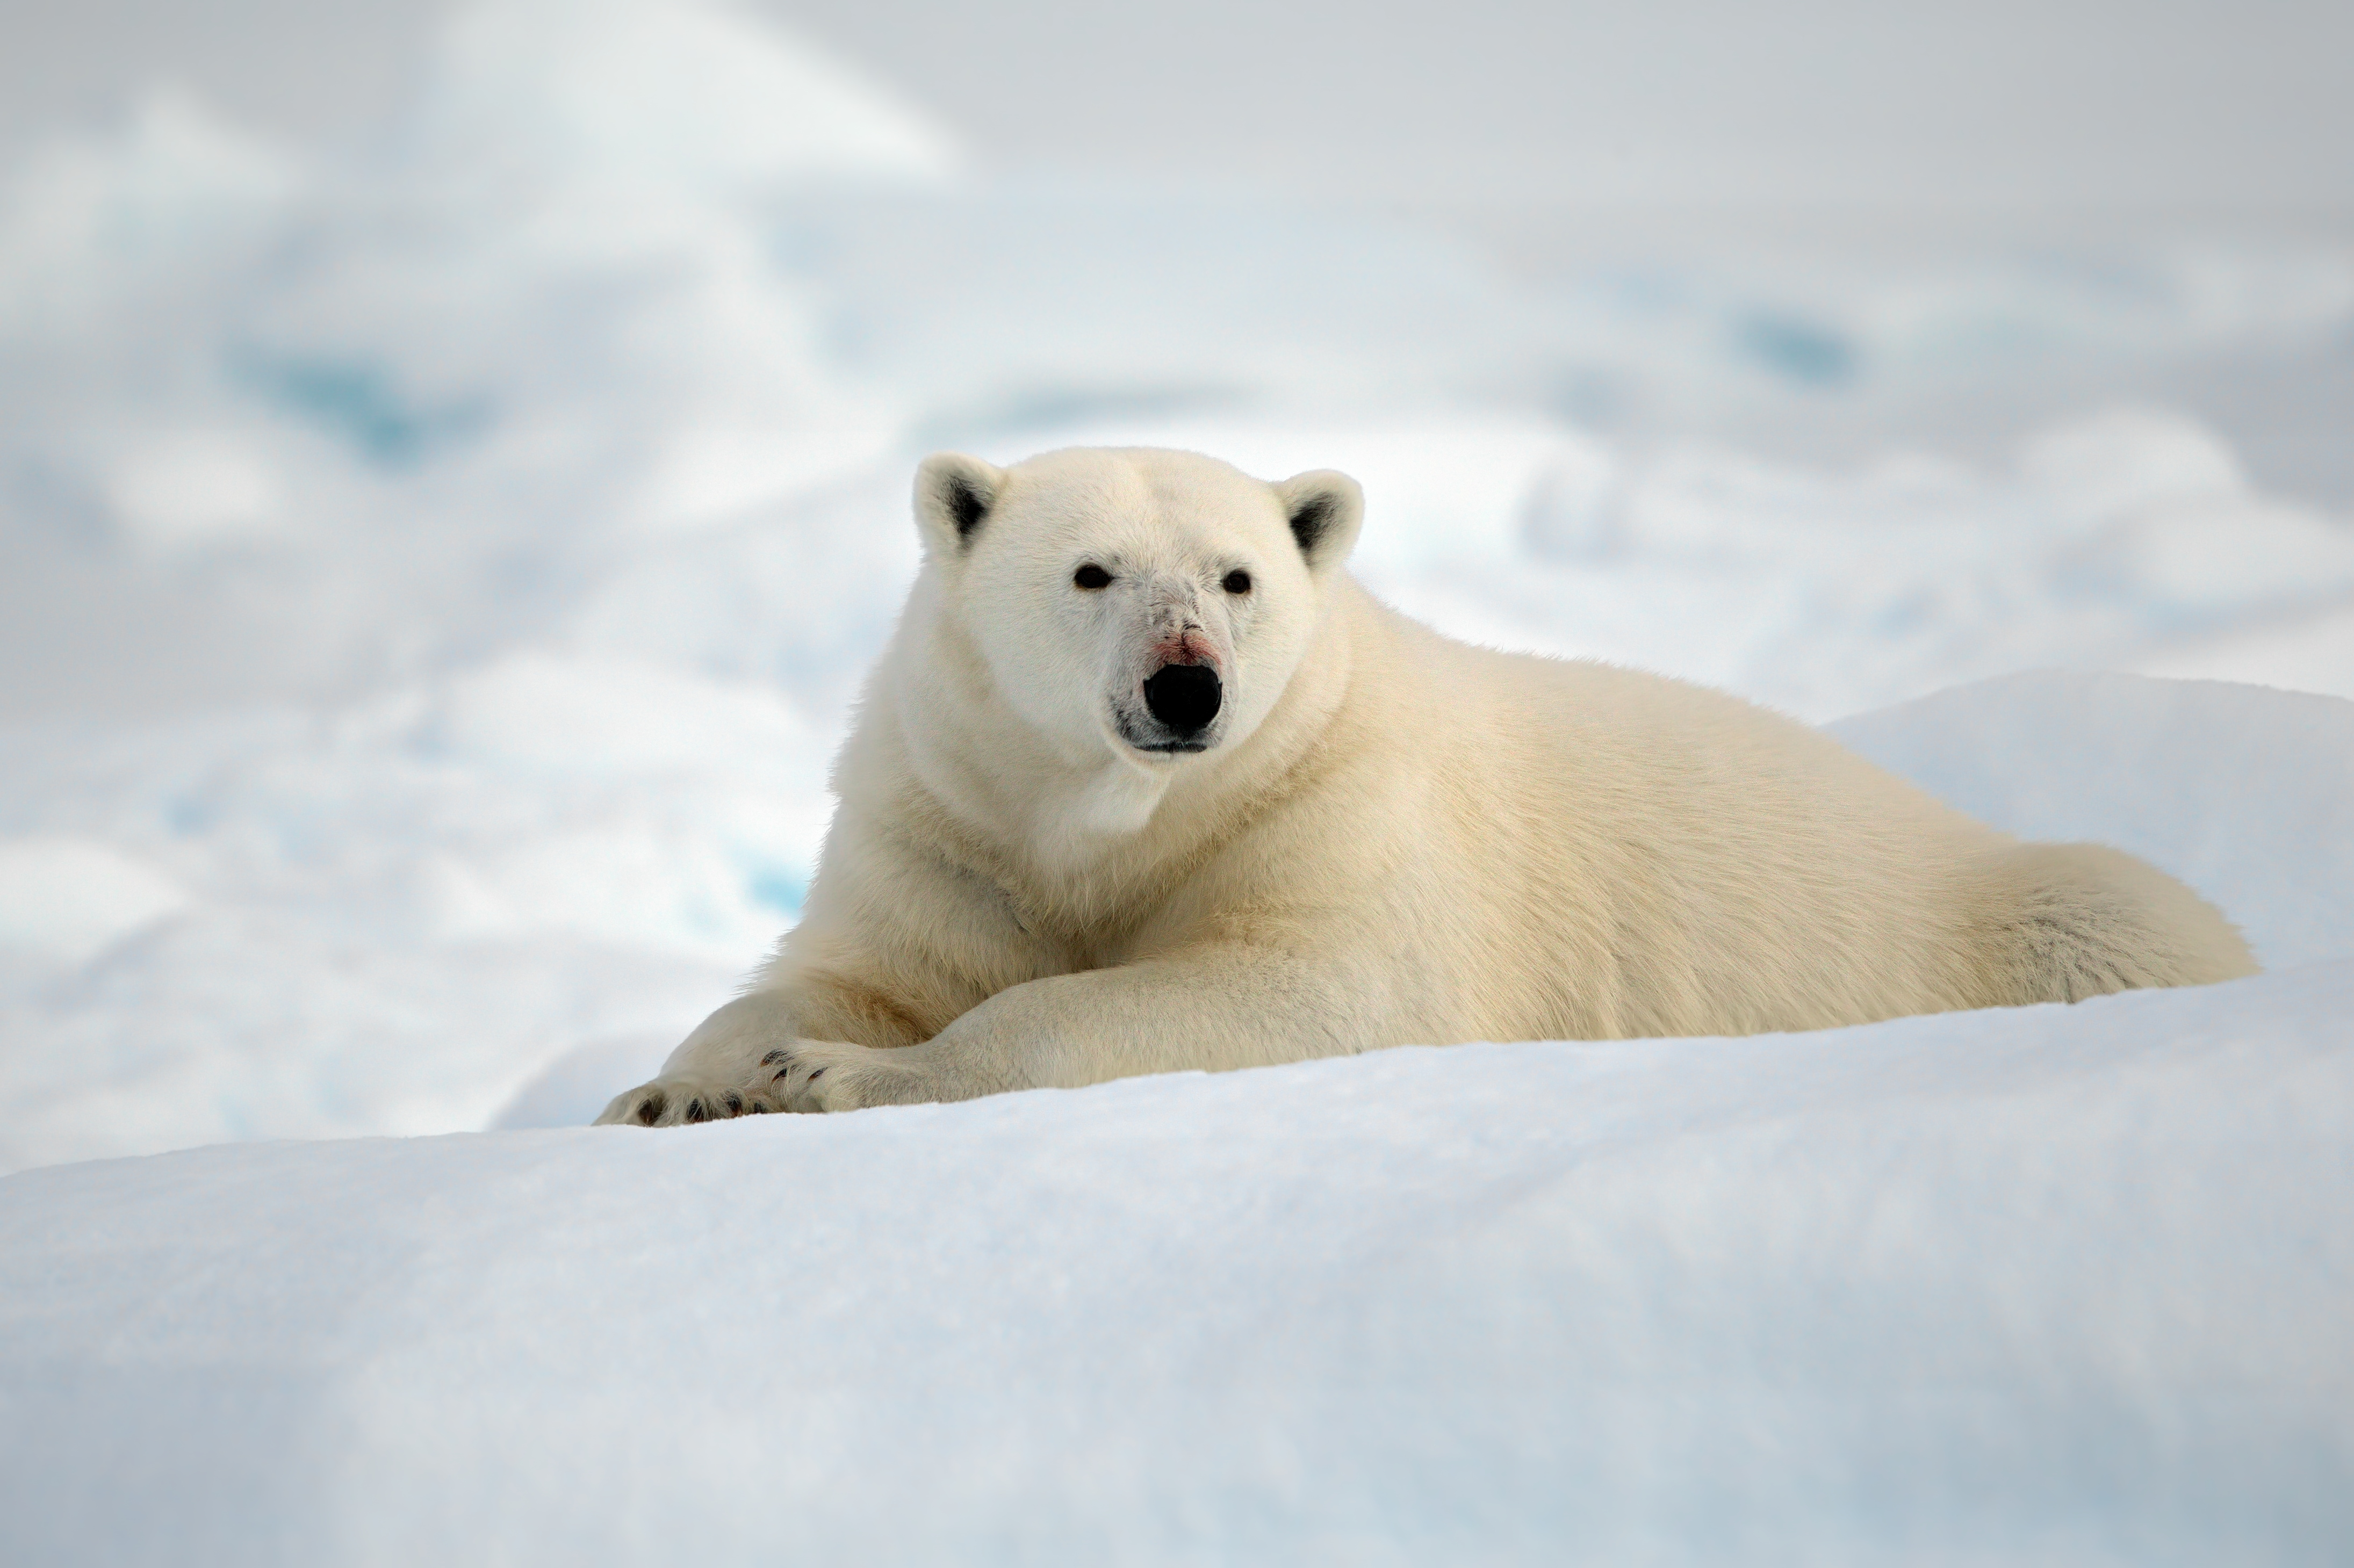 A polar bear (Ursus maritimus) lying in the snow in his habitat on a cold winter day in Svalbard. Image Credit: Wirestock, Envato Elements.